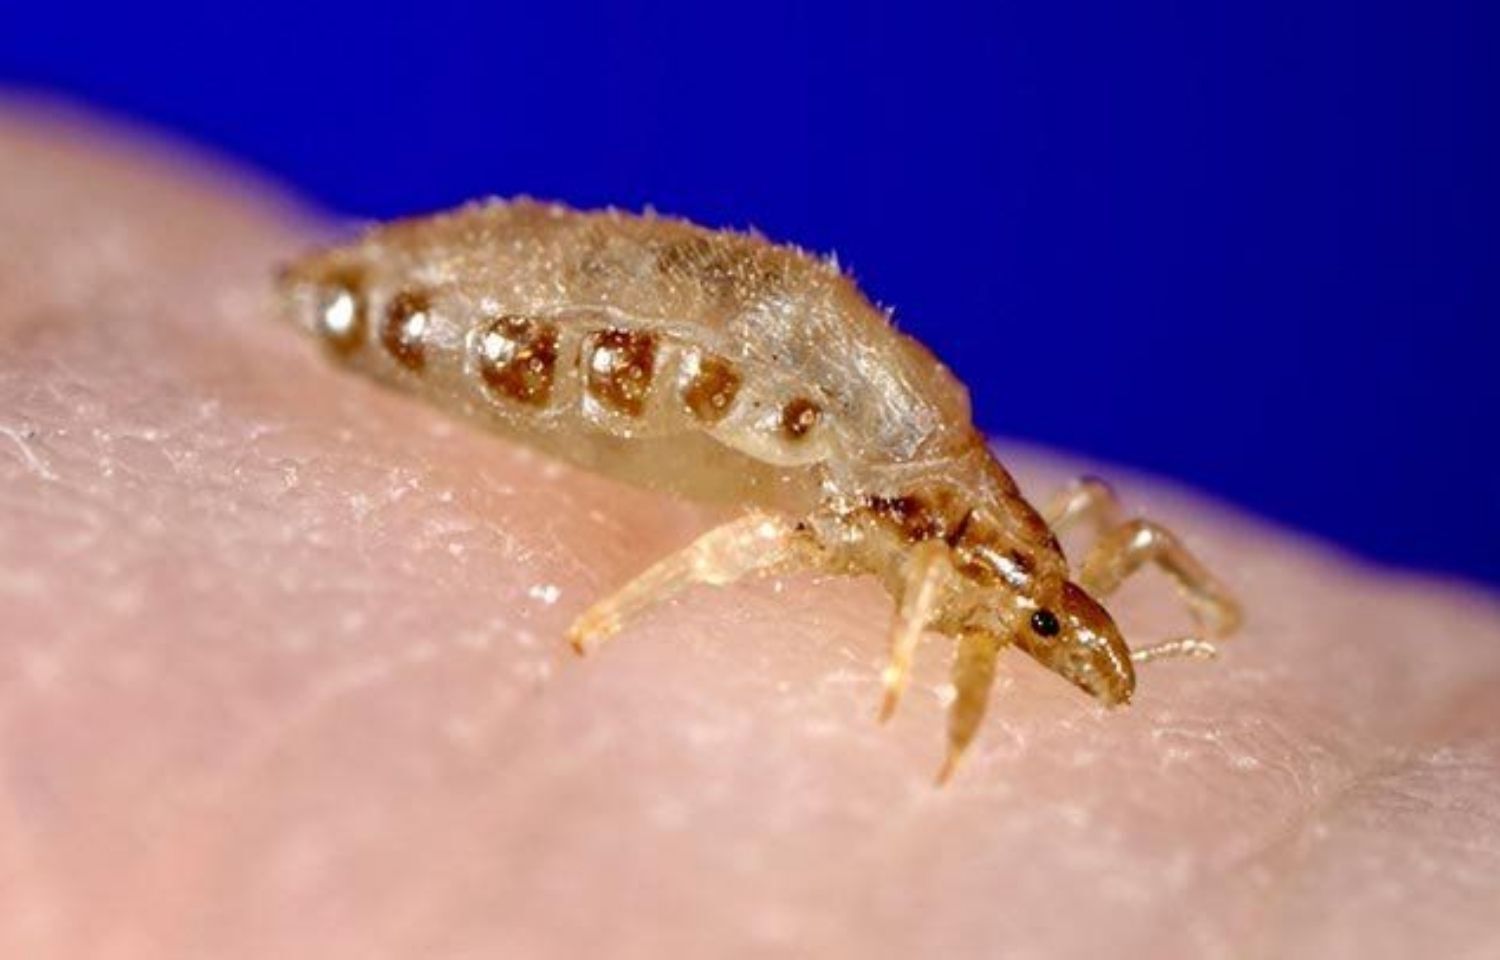 Long term body lice infestation tied to anemia- JAMA